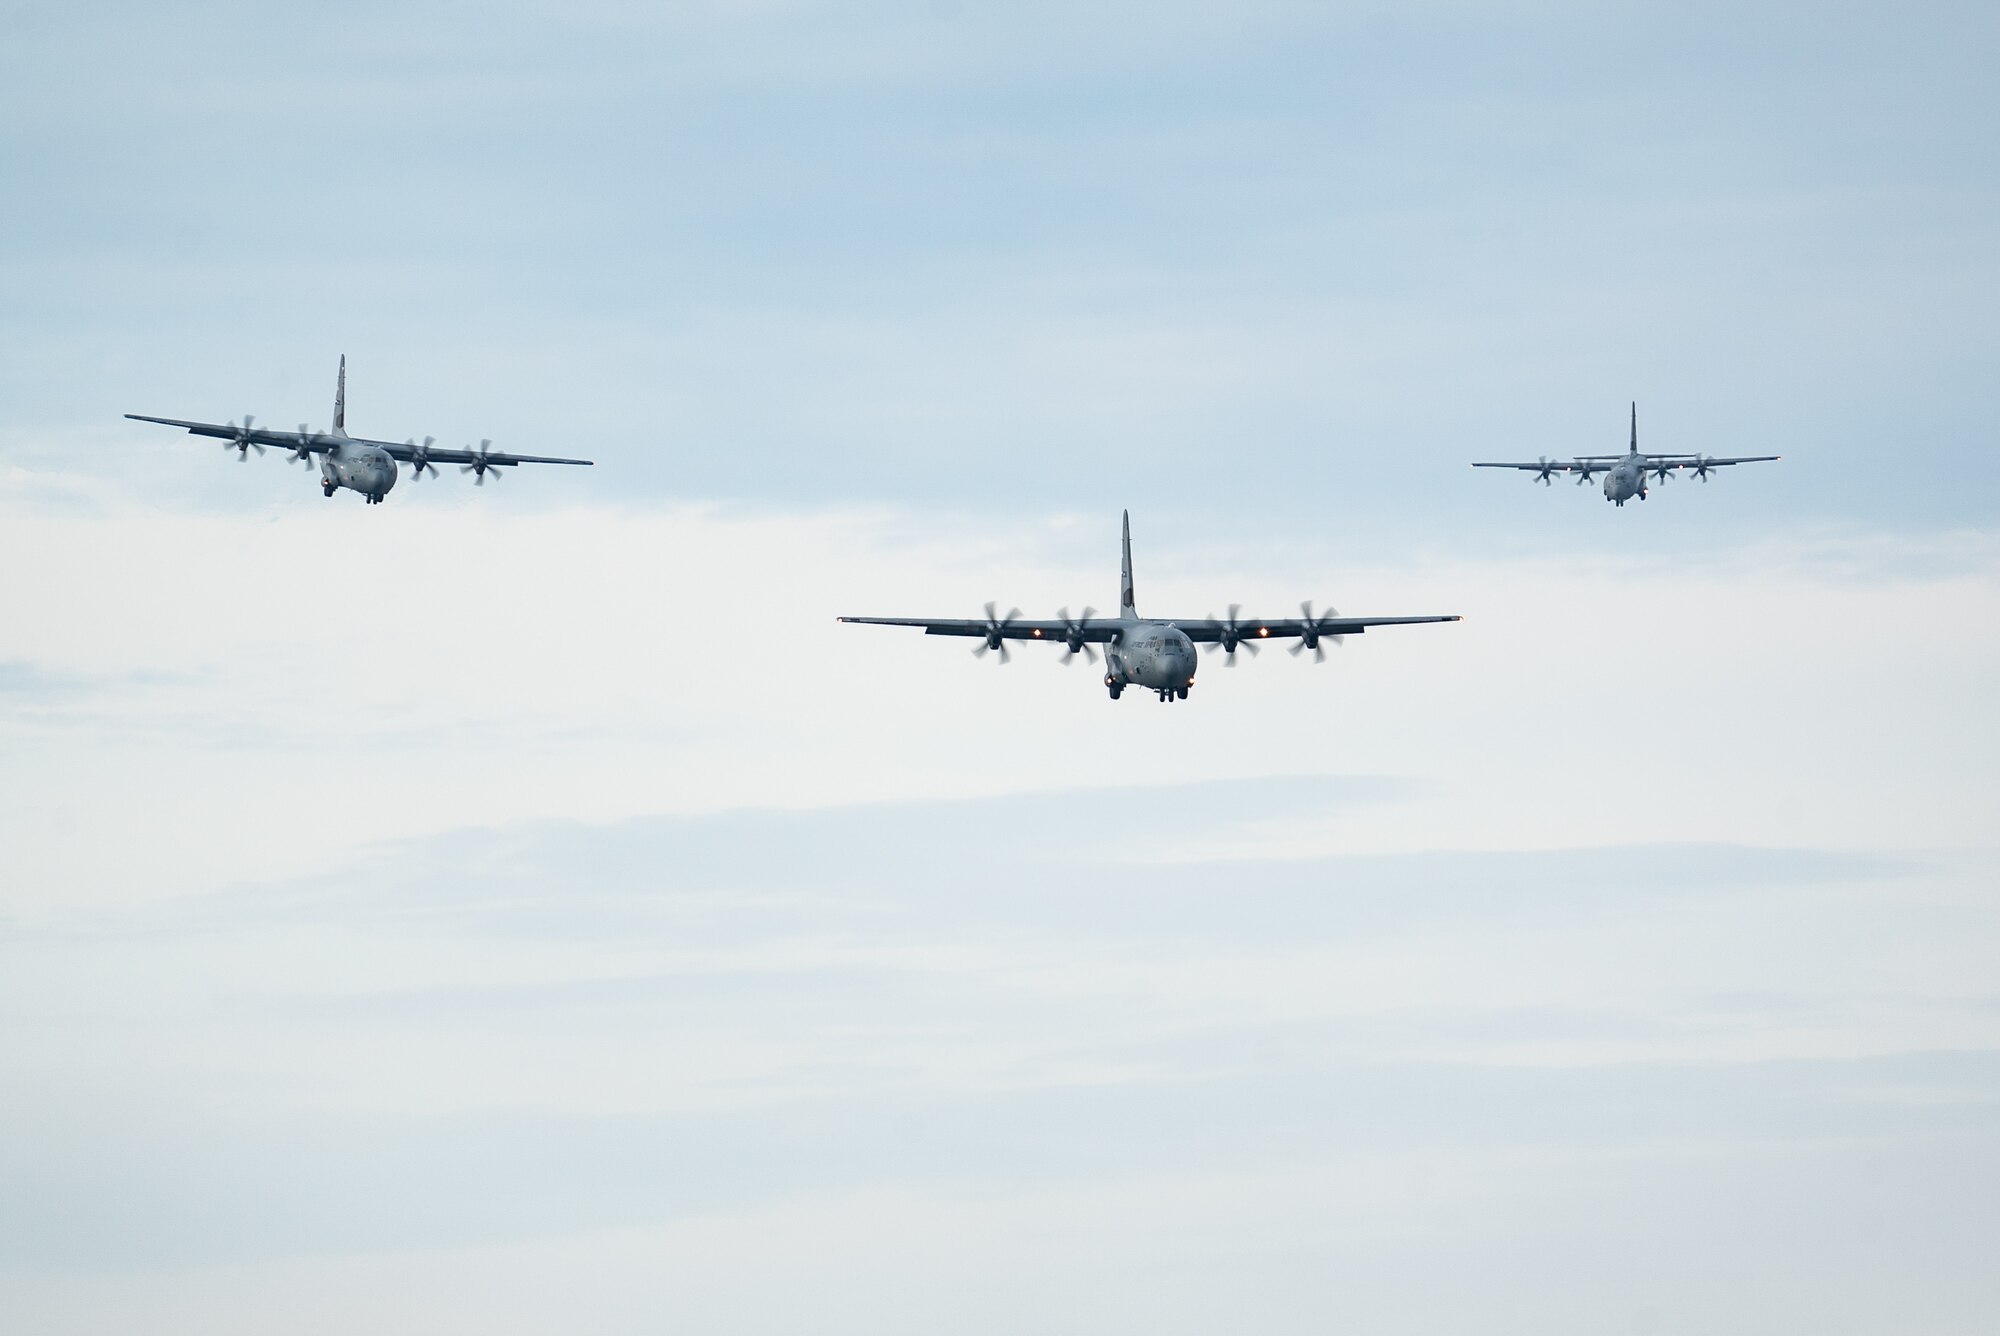 Three U.S. Air Force C-130J Super Hercules assigned to the 317th Airlift Wing at Dyess Air Force Base, Texas, approach the flight line during RED FLAG-Alaska 23-1 on Joint Base Elmendorf-Richardson, Alaska, Oct. 14, 2022. This exercise provides unique opportunities to integrate various forces into joint, coalition and multilateral training from simulated forward operating bases. (U.S. Air Force photo by Airman 1st Class J. Michael Peña)